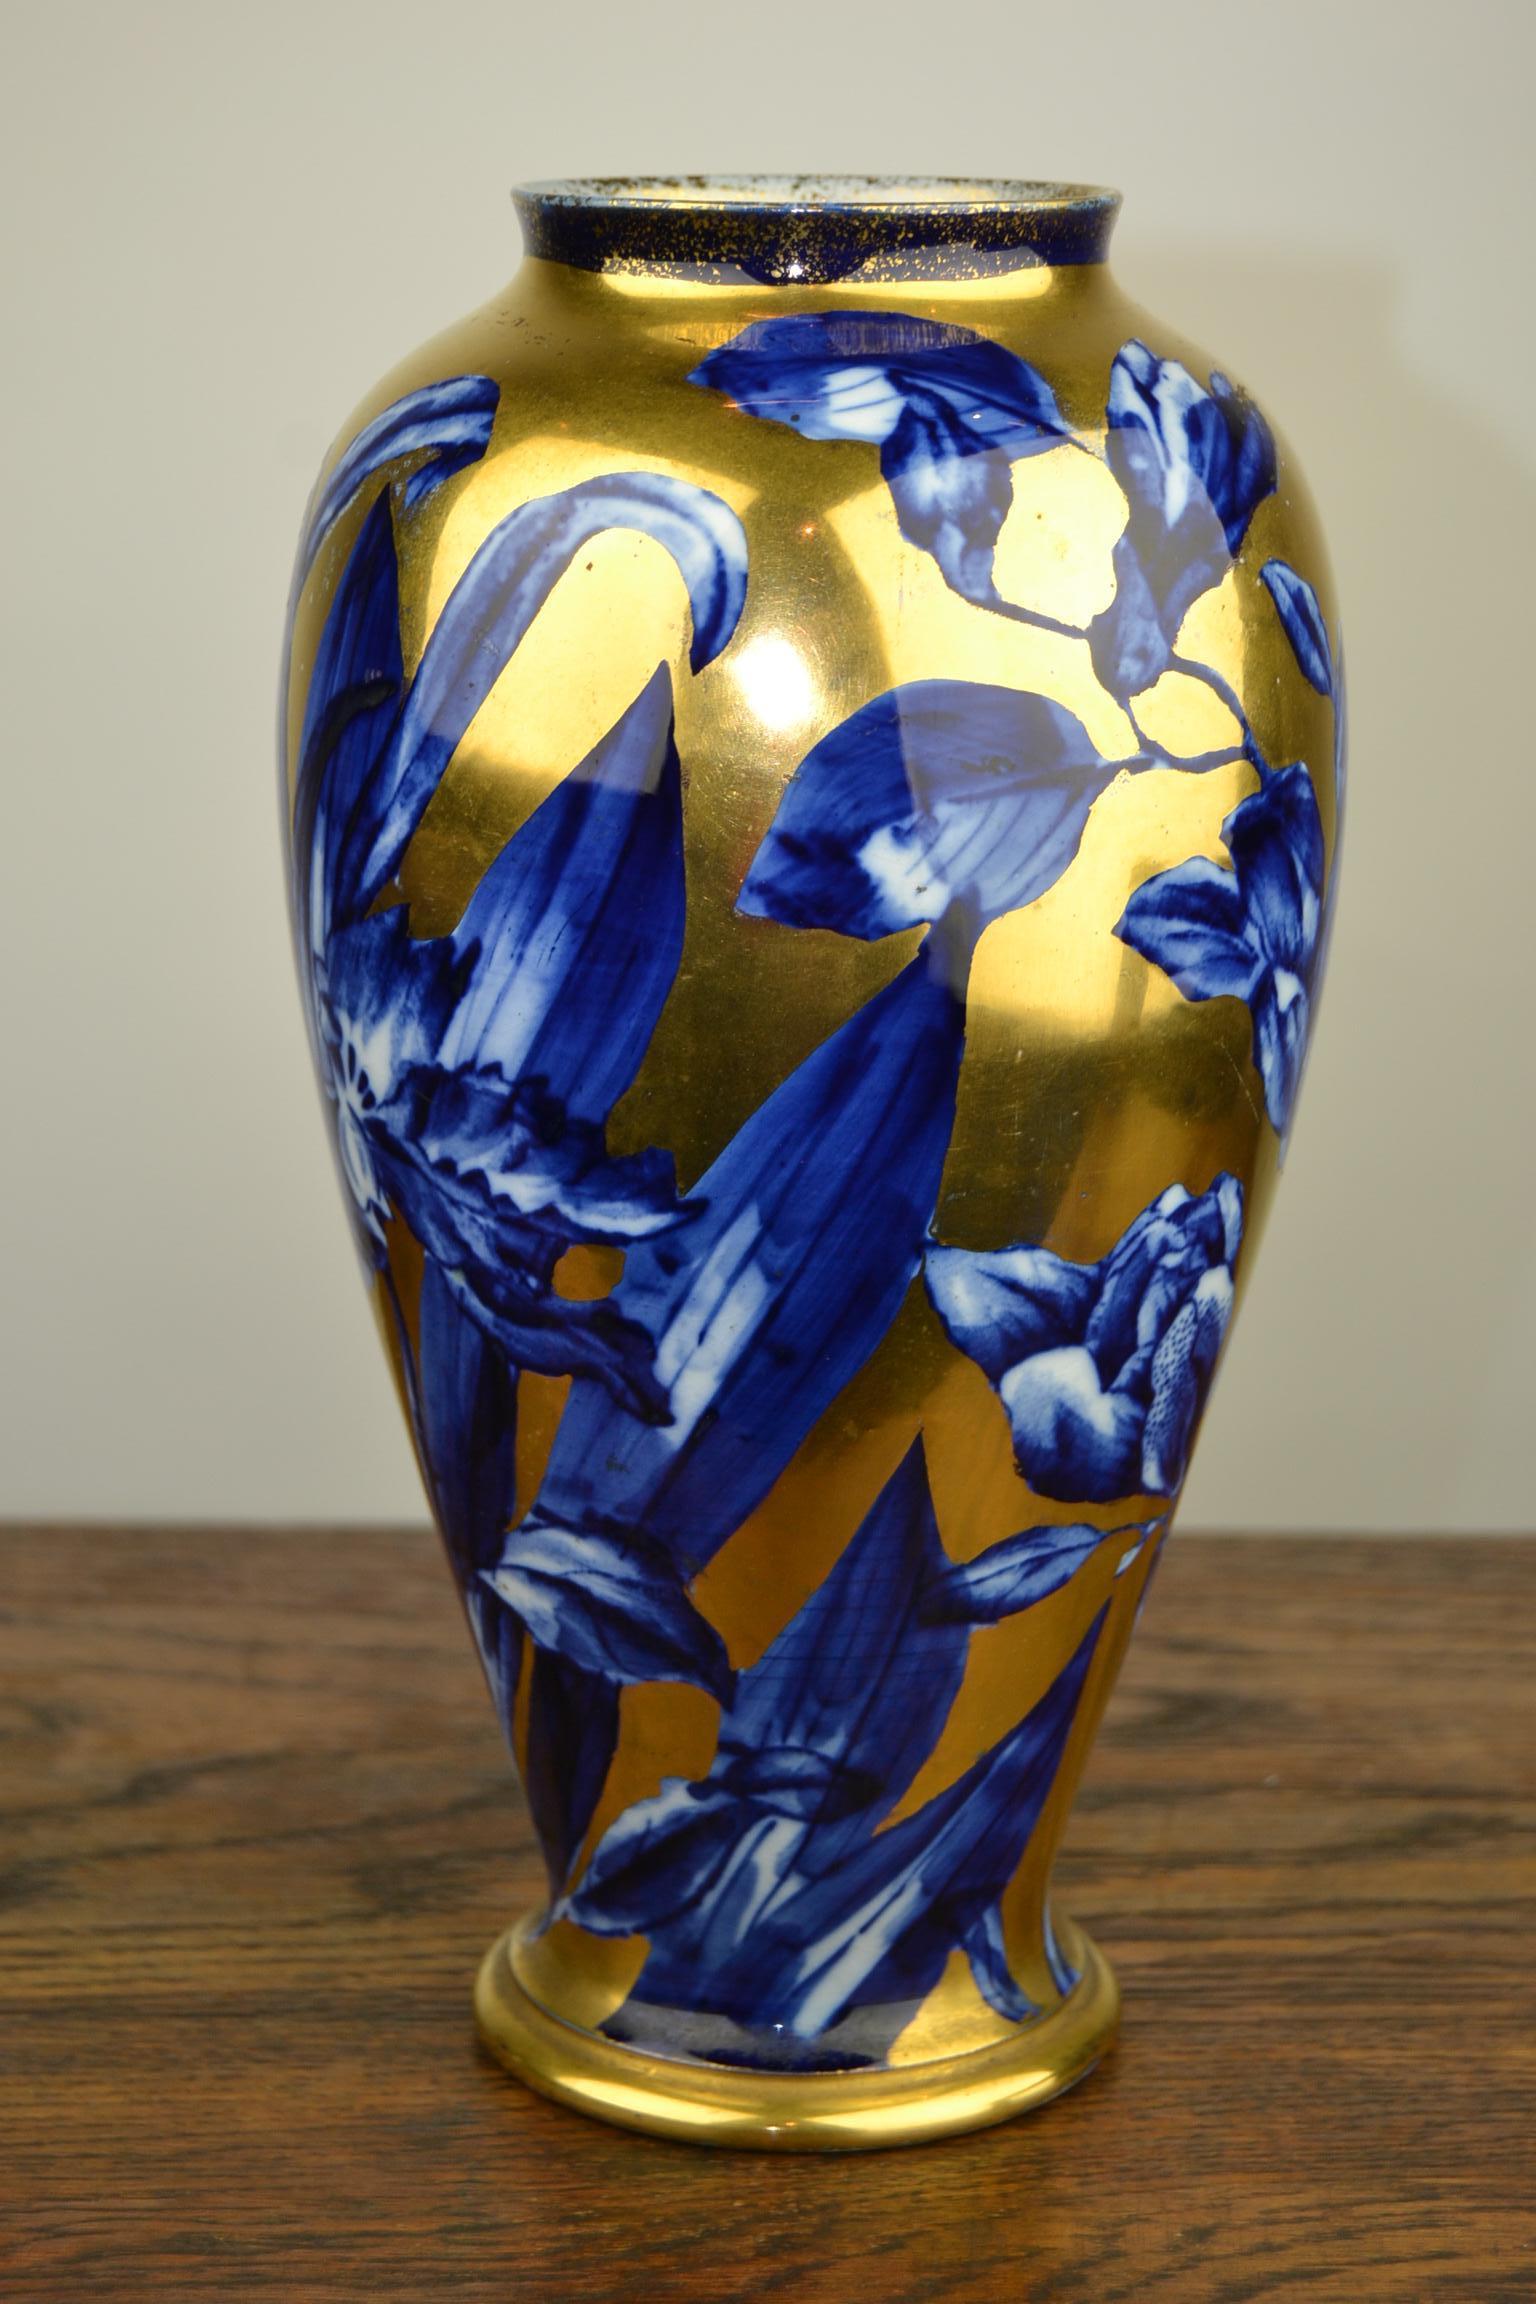 Stylish Art Nouveau Vase by Thomas Forester Pottery England.
Hand-painted Floral Design with great use of the colors Cobalt Blue and Gold.
A short everted lip above a tapering Body ending in a splayed Foot.
This Flow Blue Vase is Stamped on the